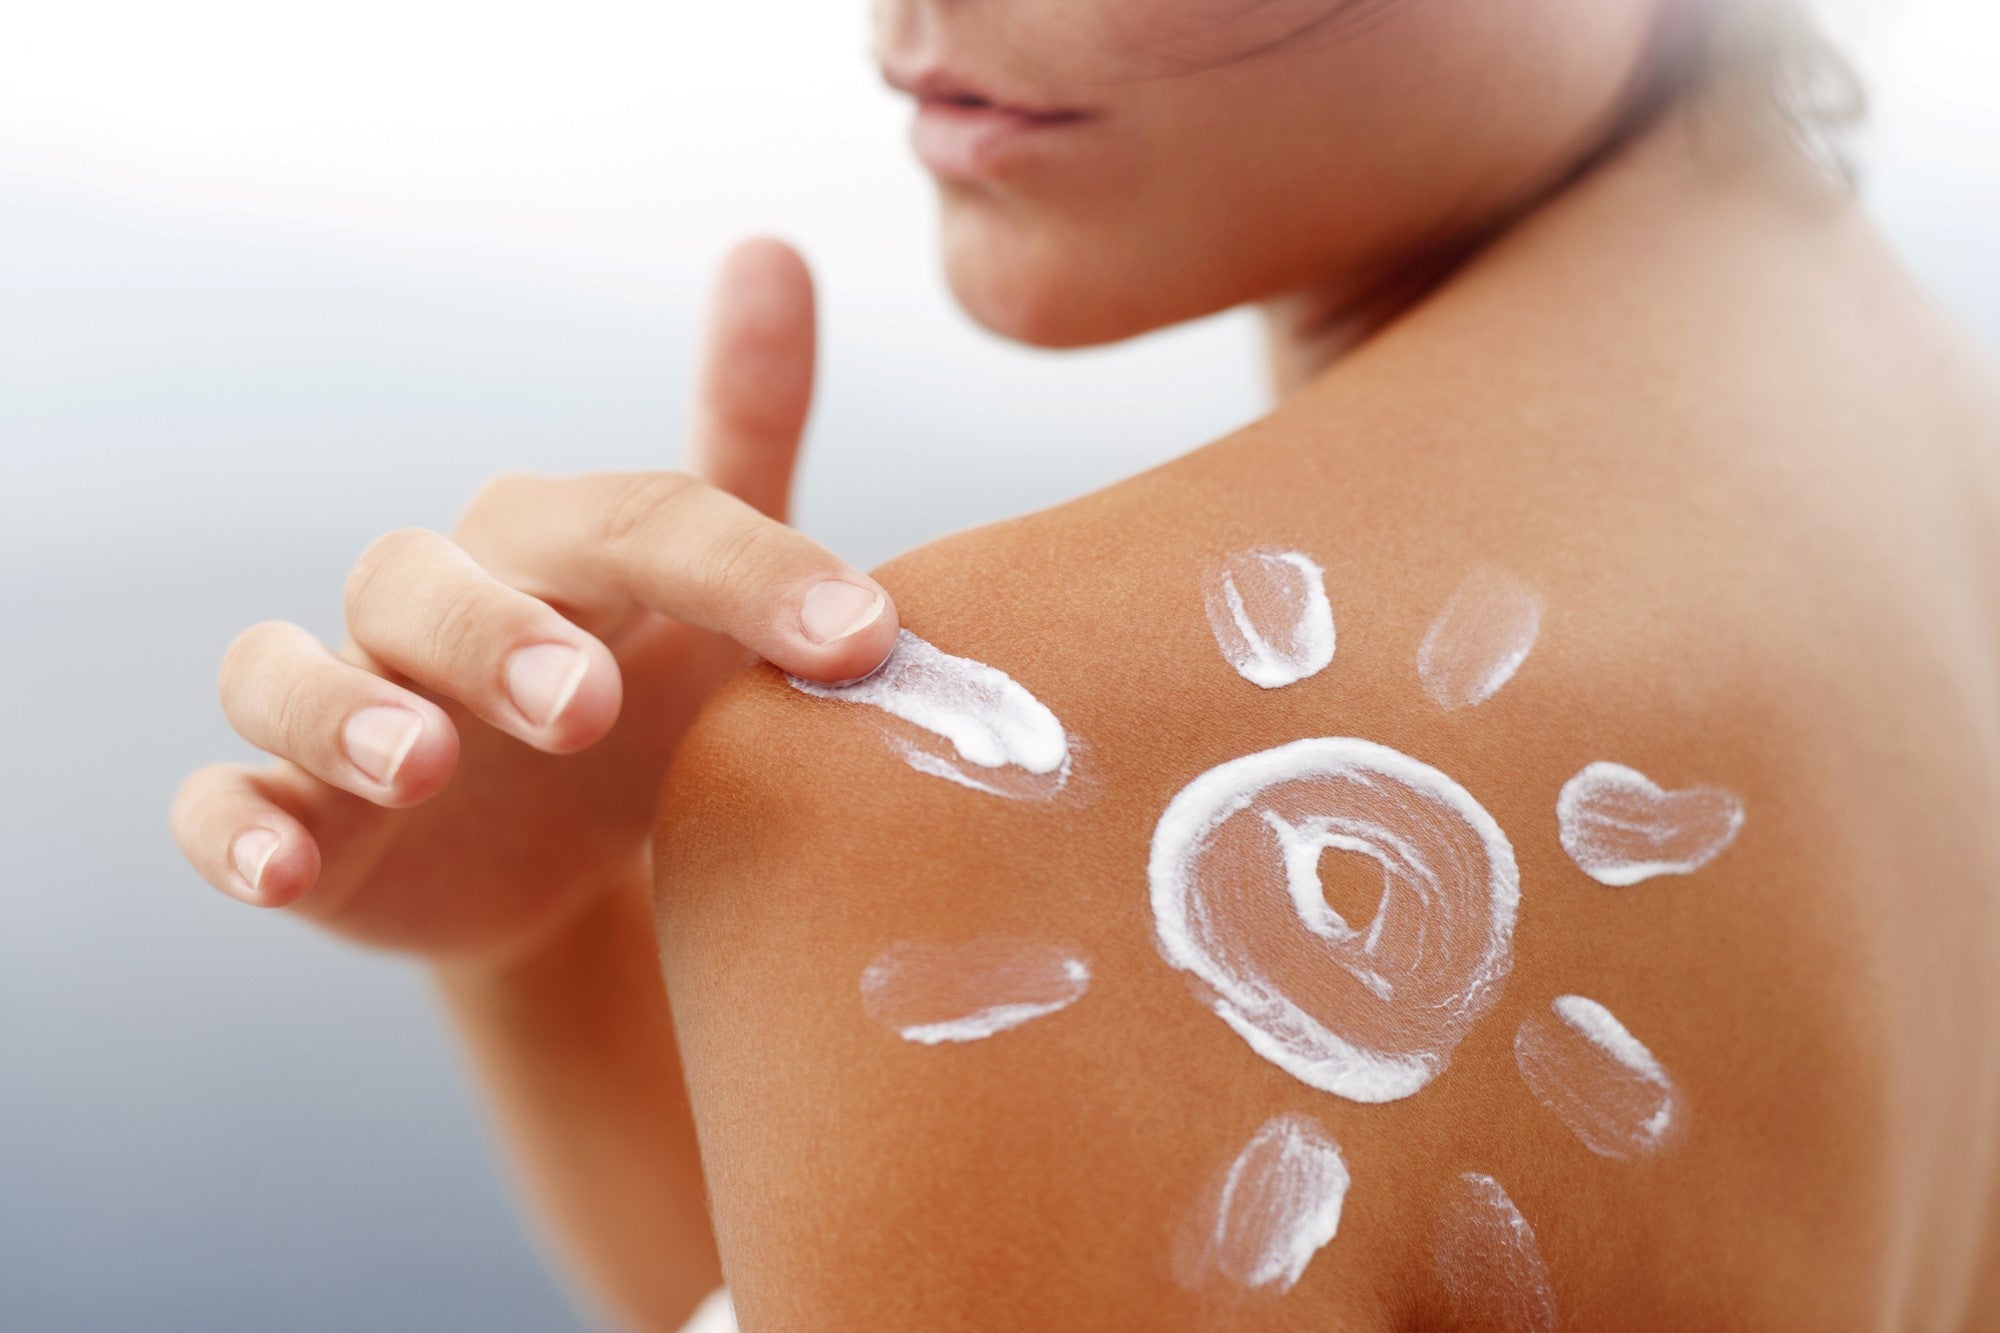 How to Use Sunscreen the Right Way: 7 Tips That May Surprise You